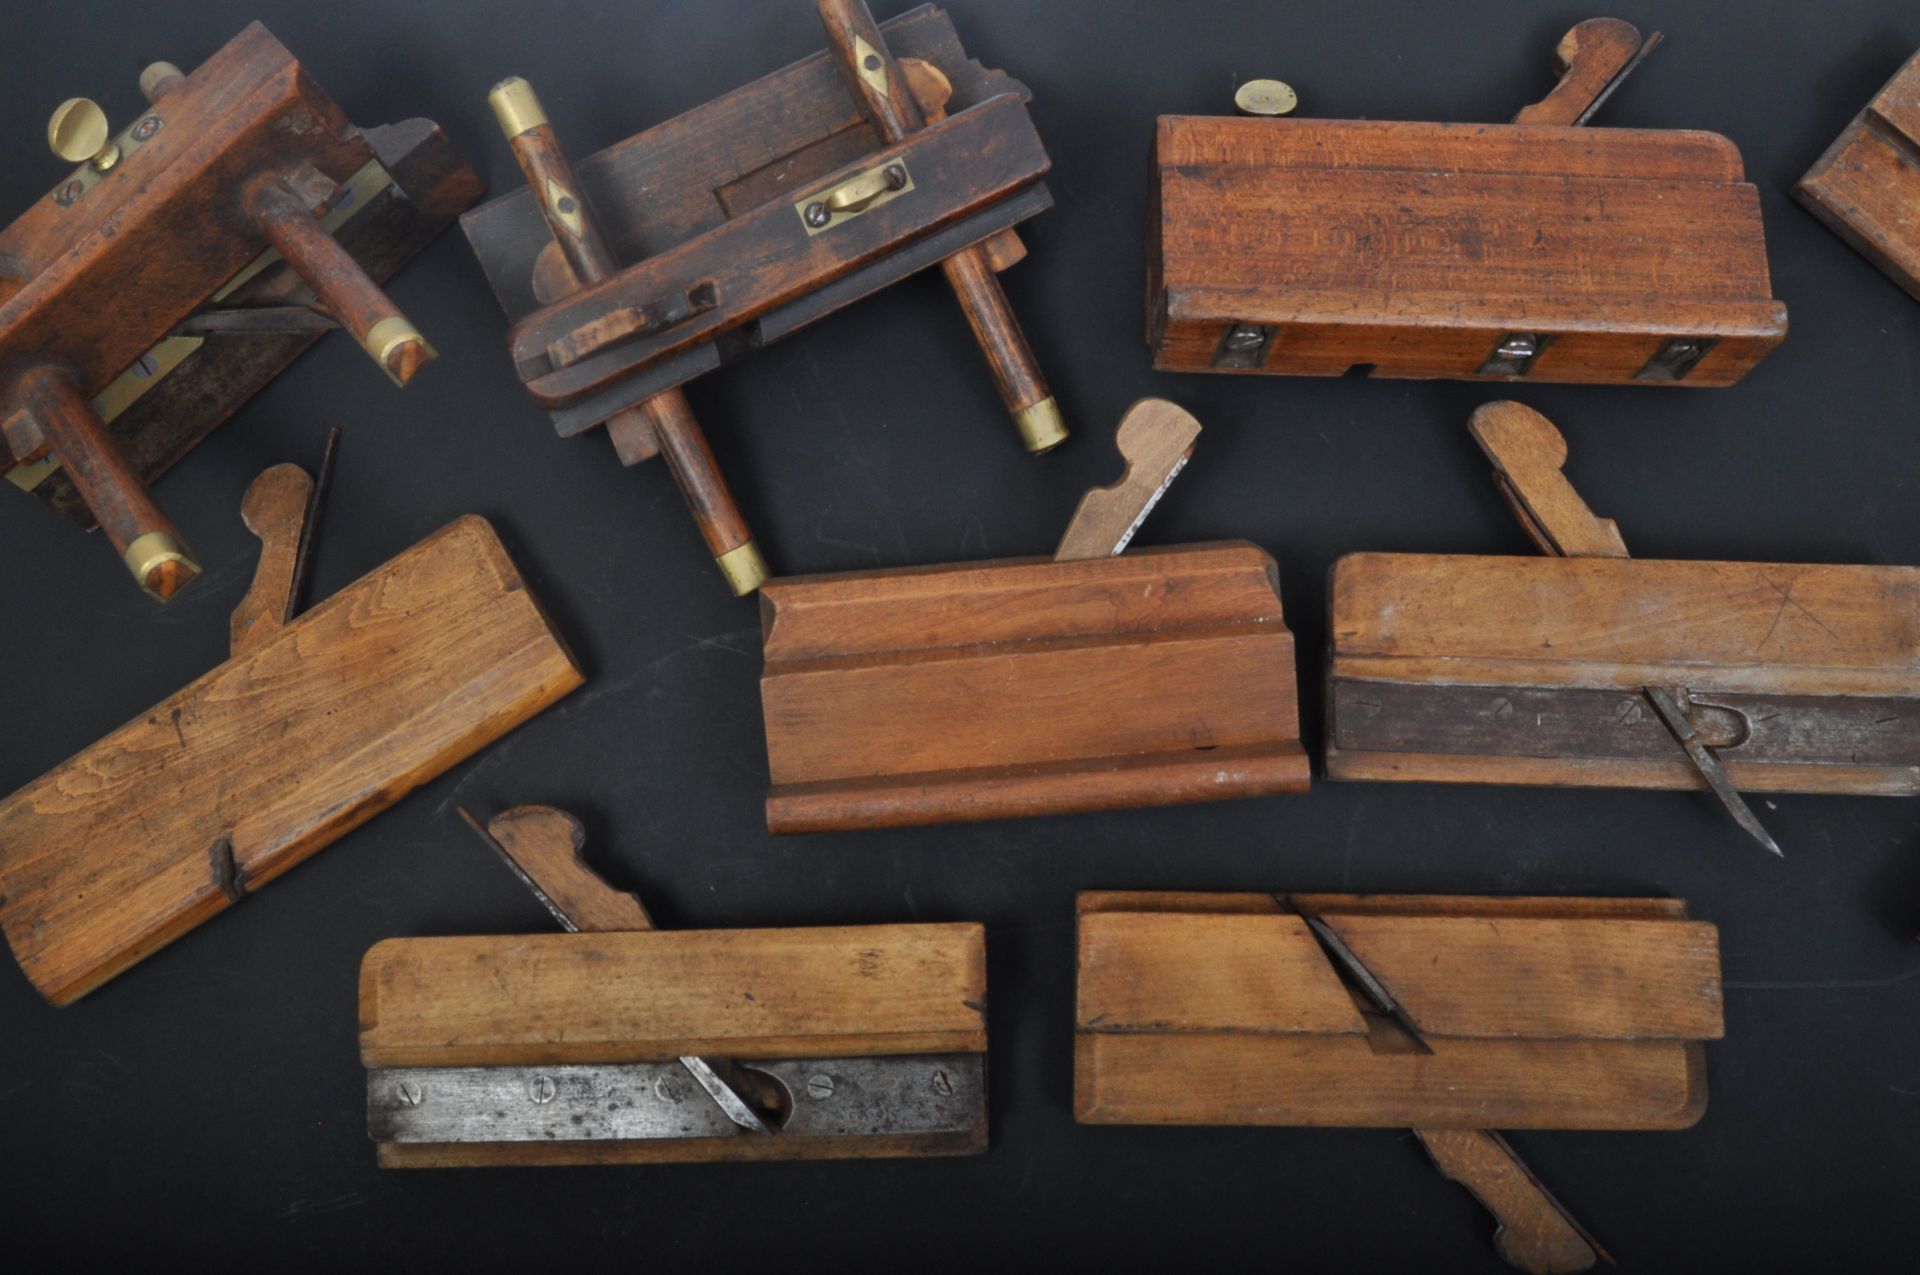 COLLECTION OF 20TH CENTURY WOODEN PLANES - MAJORITY NAMED